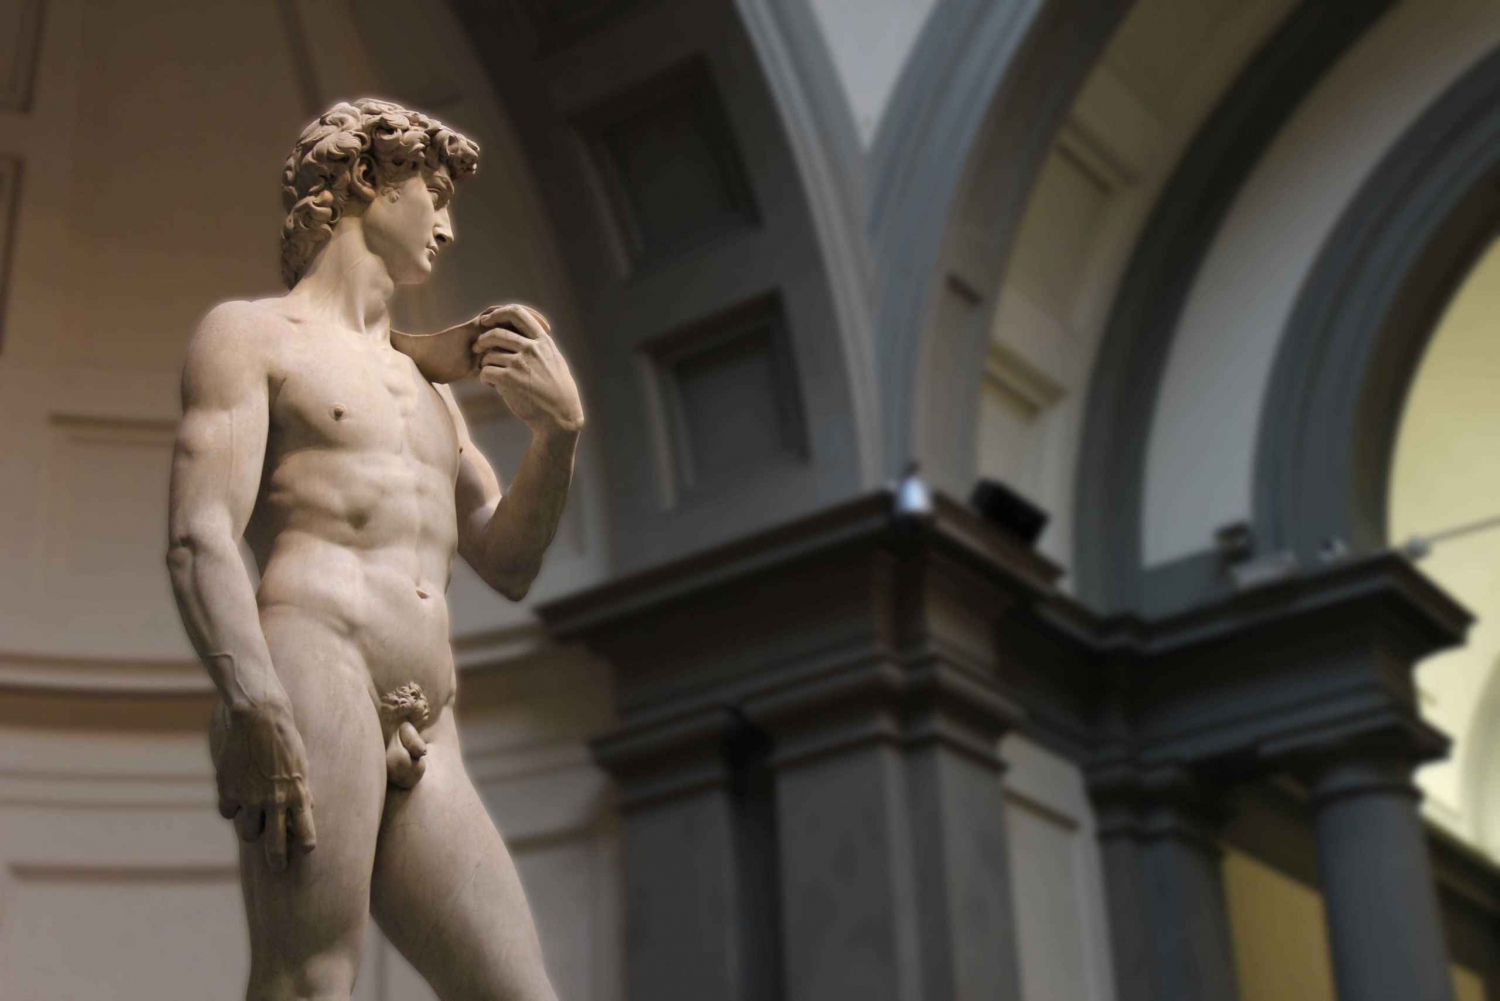 Florence: Wandeltour met Galleria dell'Accademia